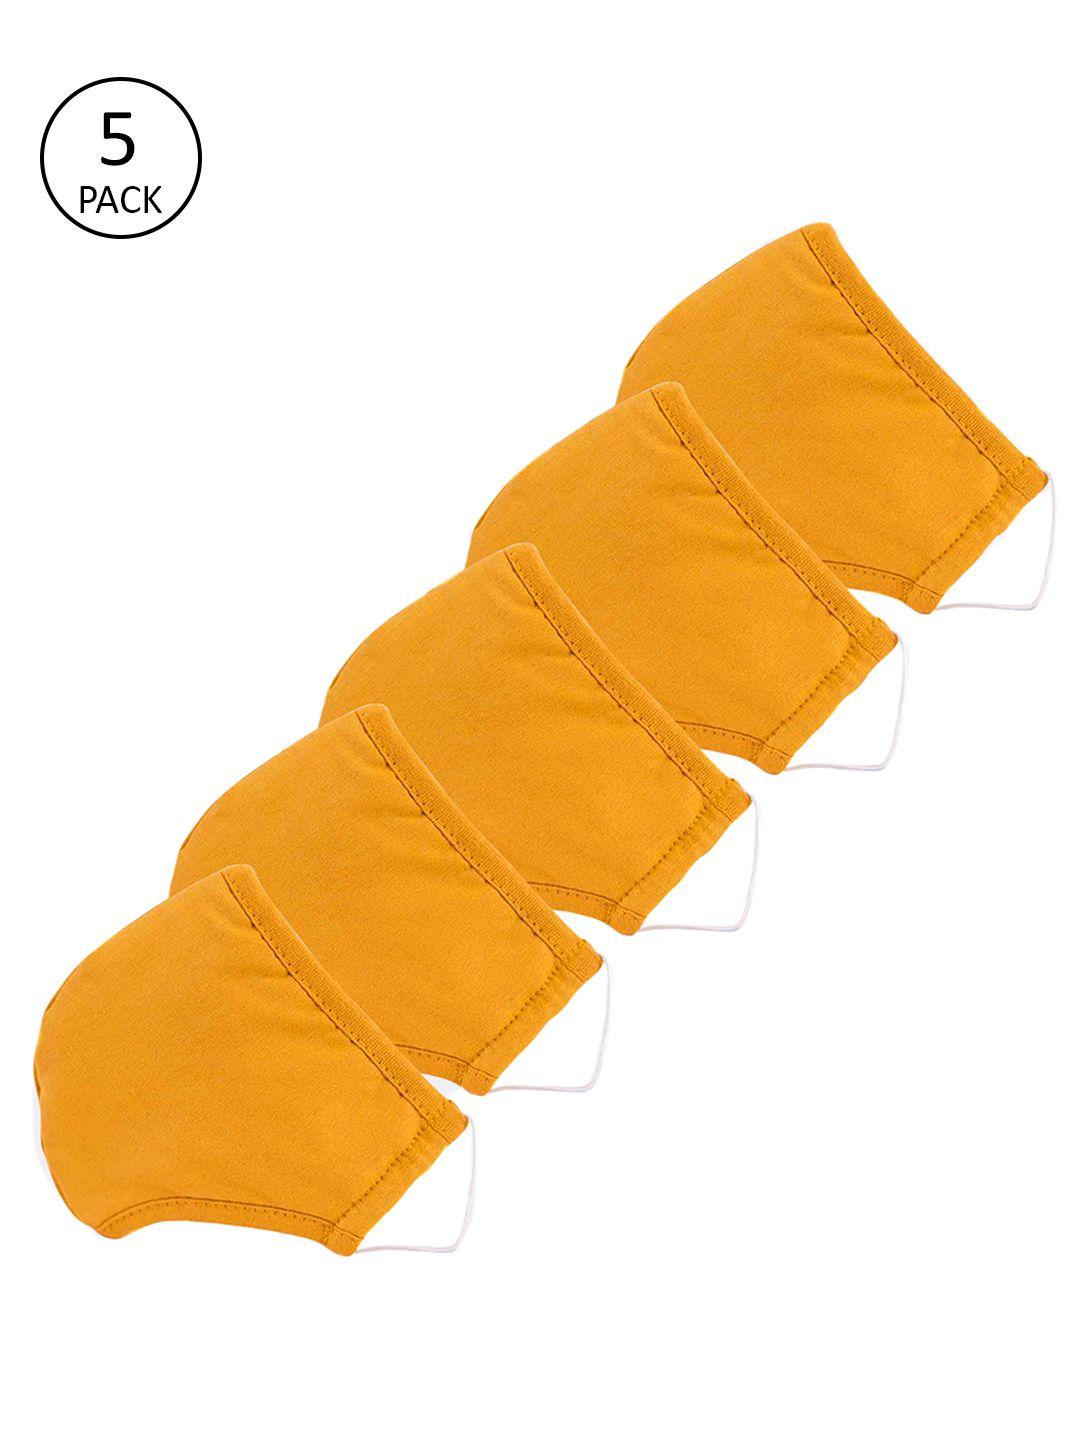 dillinger adults mustard yellow pack of 5 reusable 3-layer outdoor masks